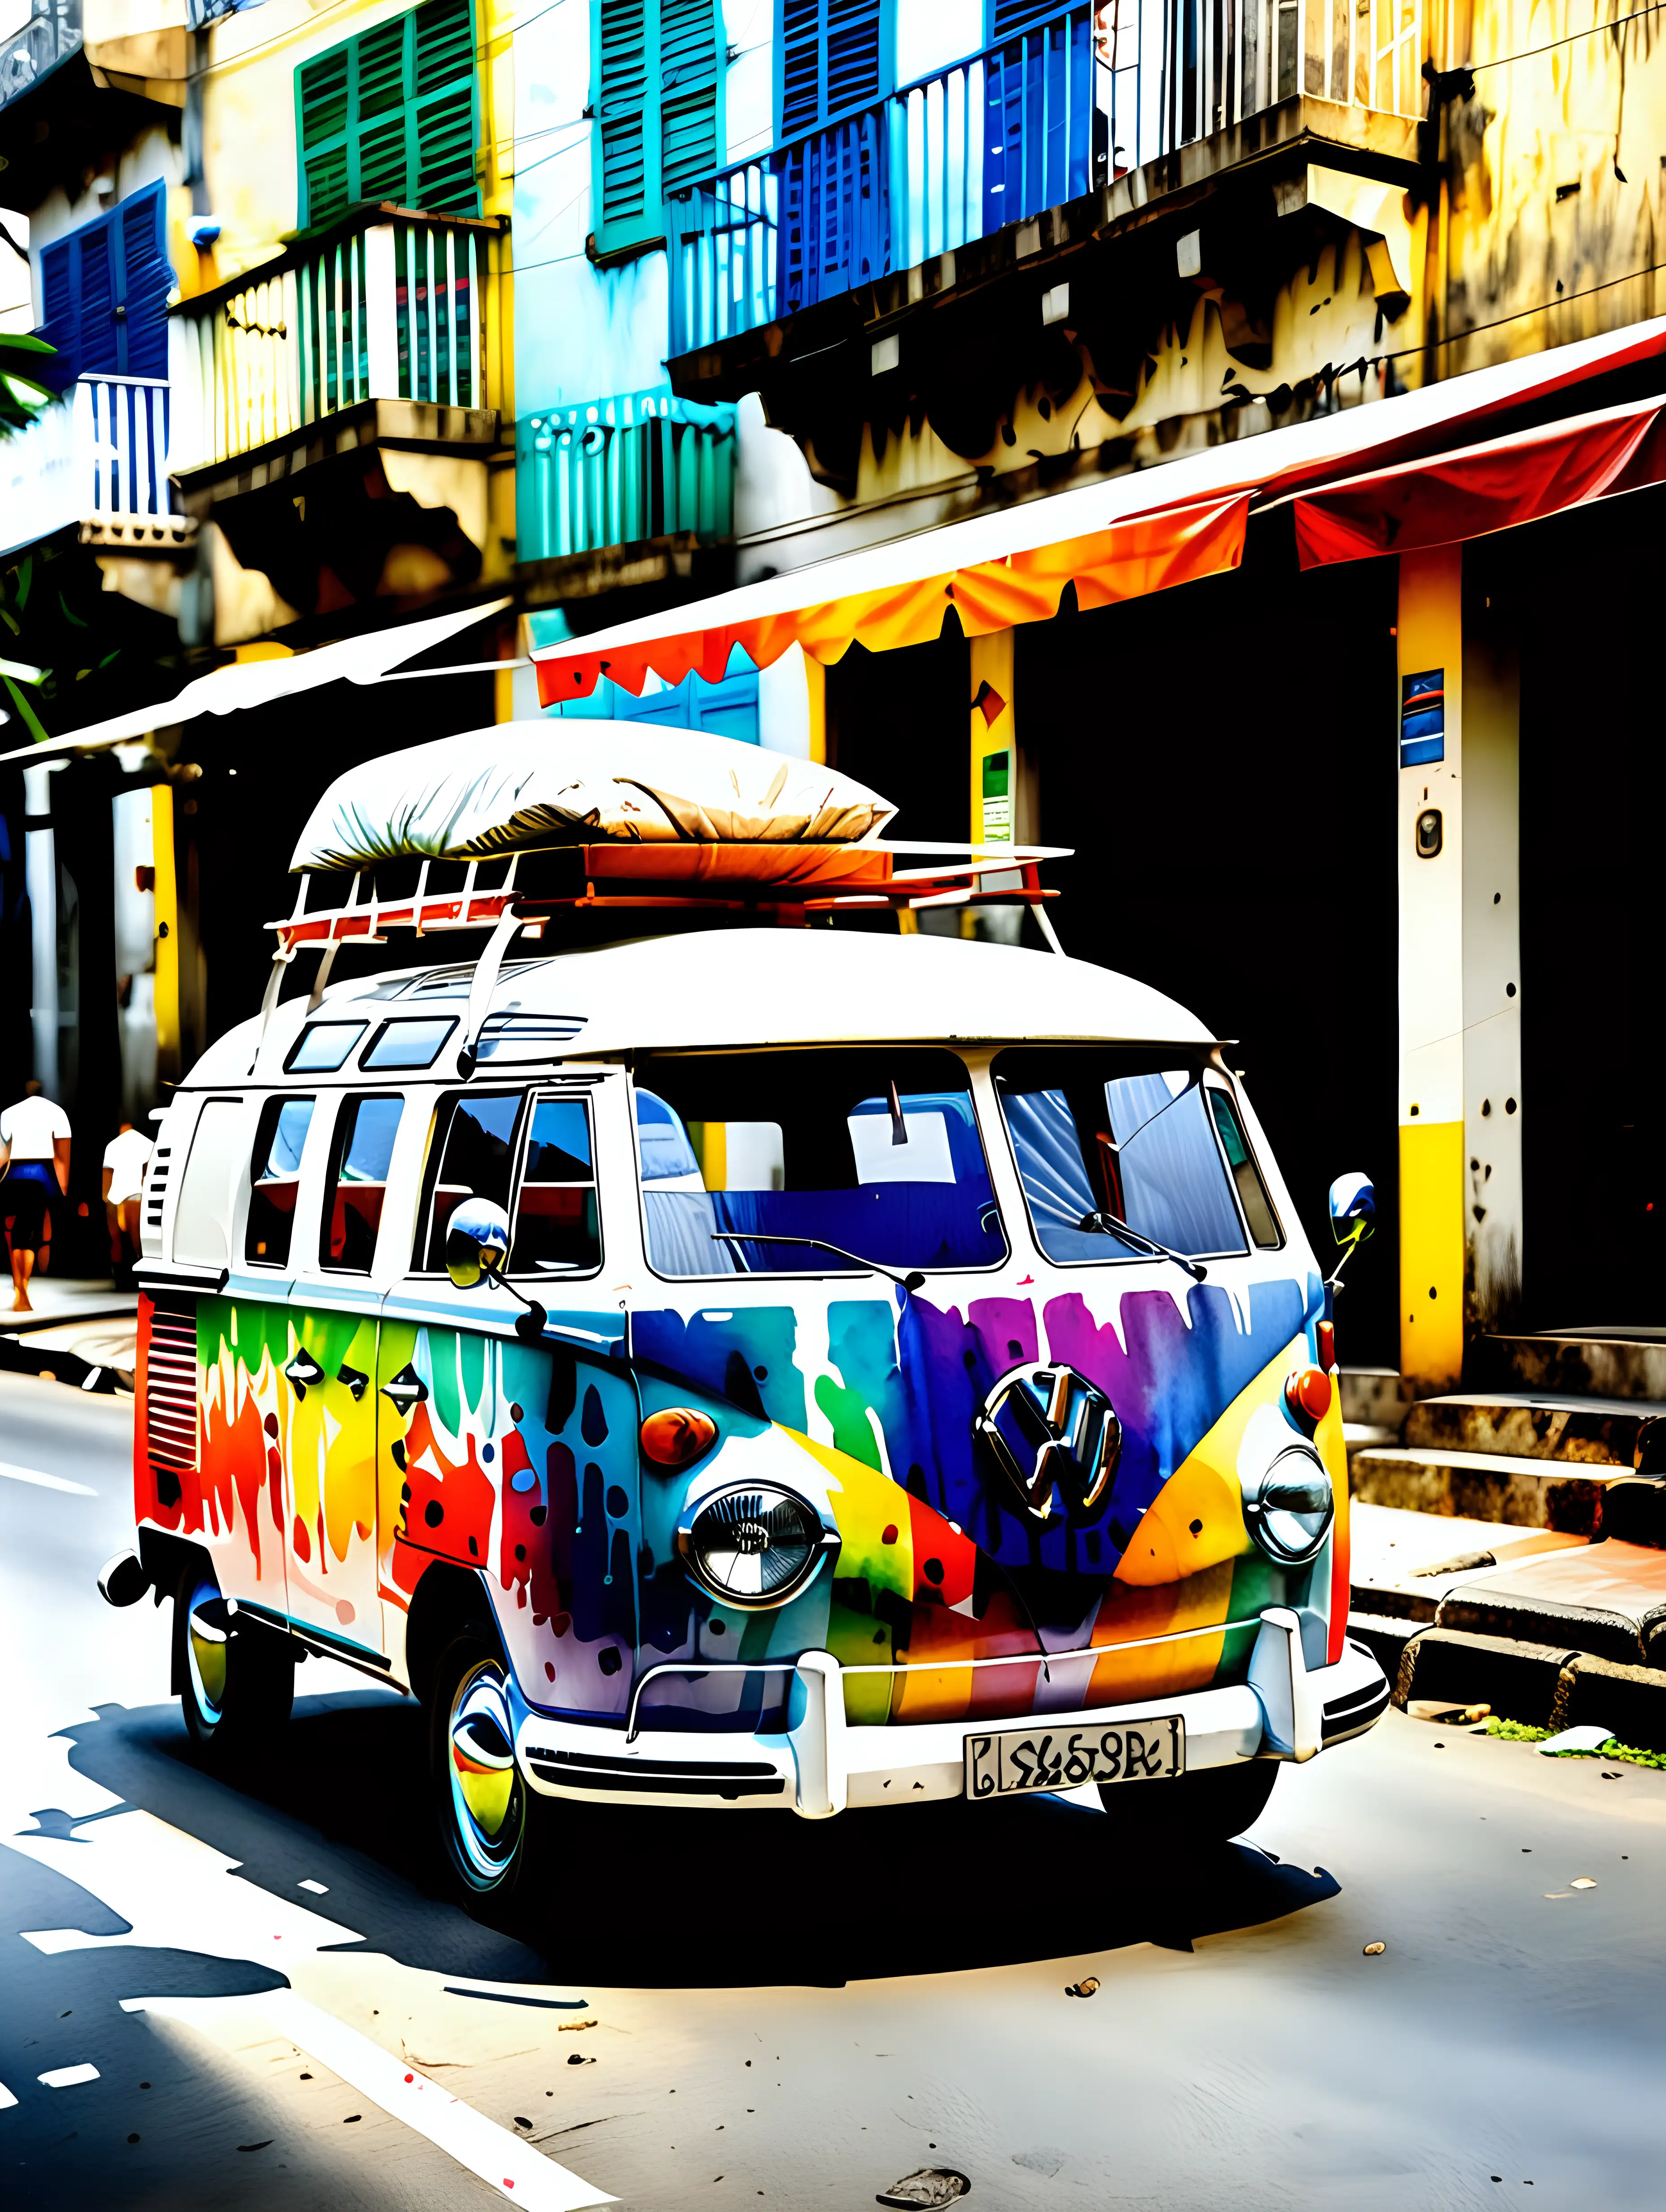 Vibrant Watercolor Painting of a 1960 VW Kombi in Rio de Janeiro